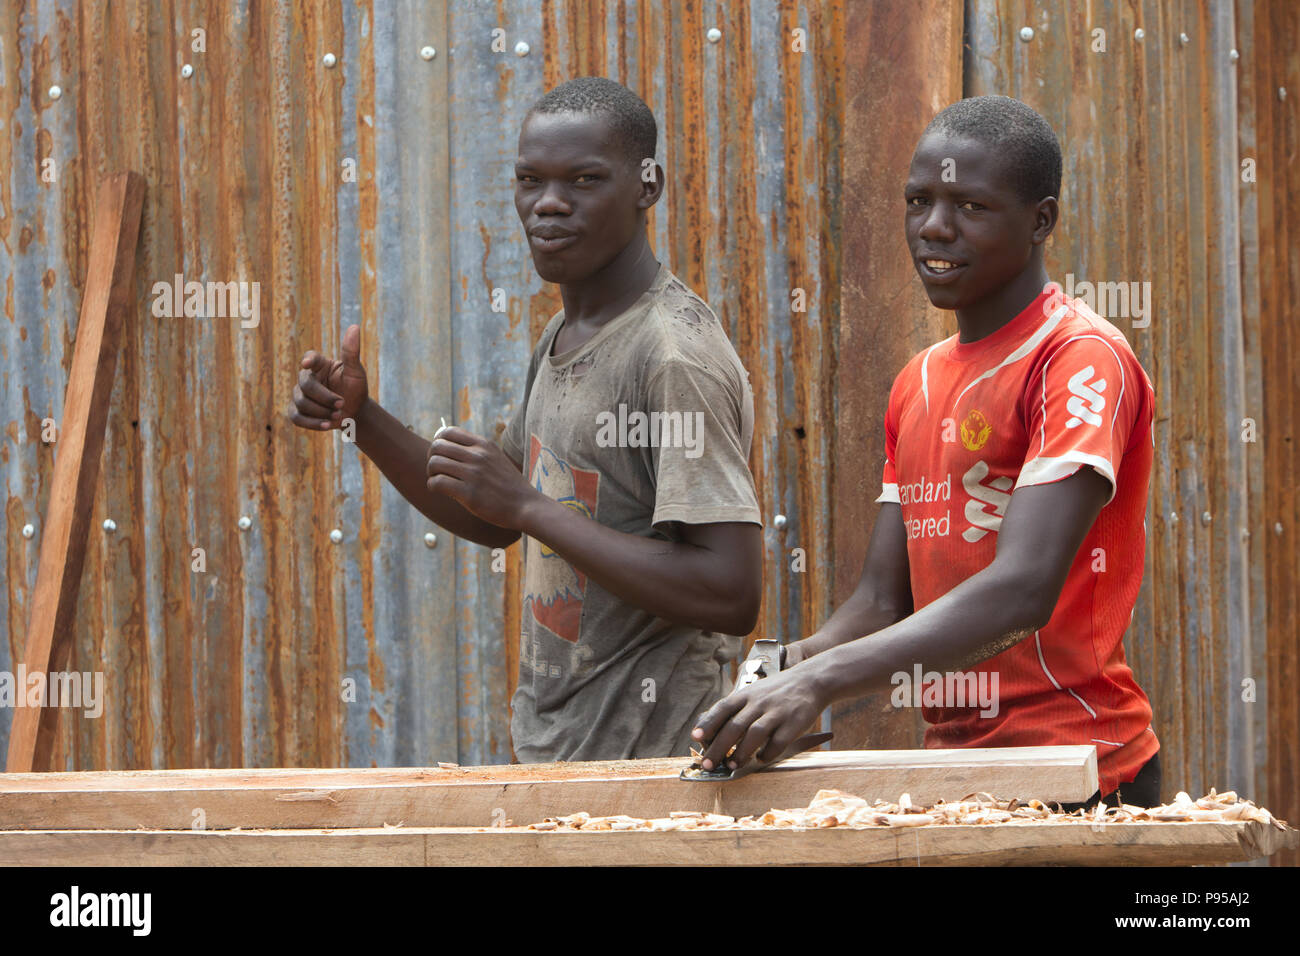 Kamdini, Uganda - A joiner is planing a wooden beam with a wooden planer. Stock Photo